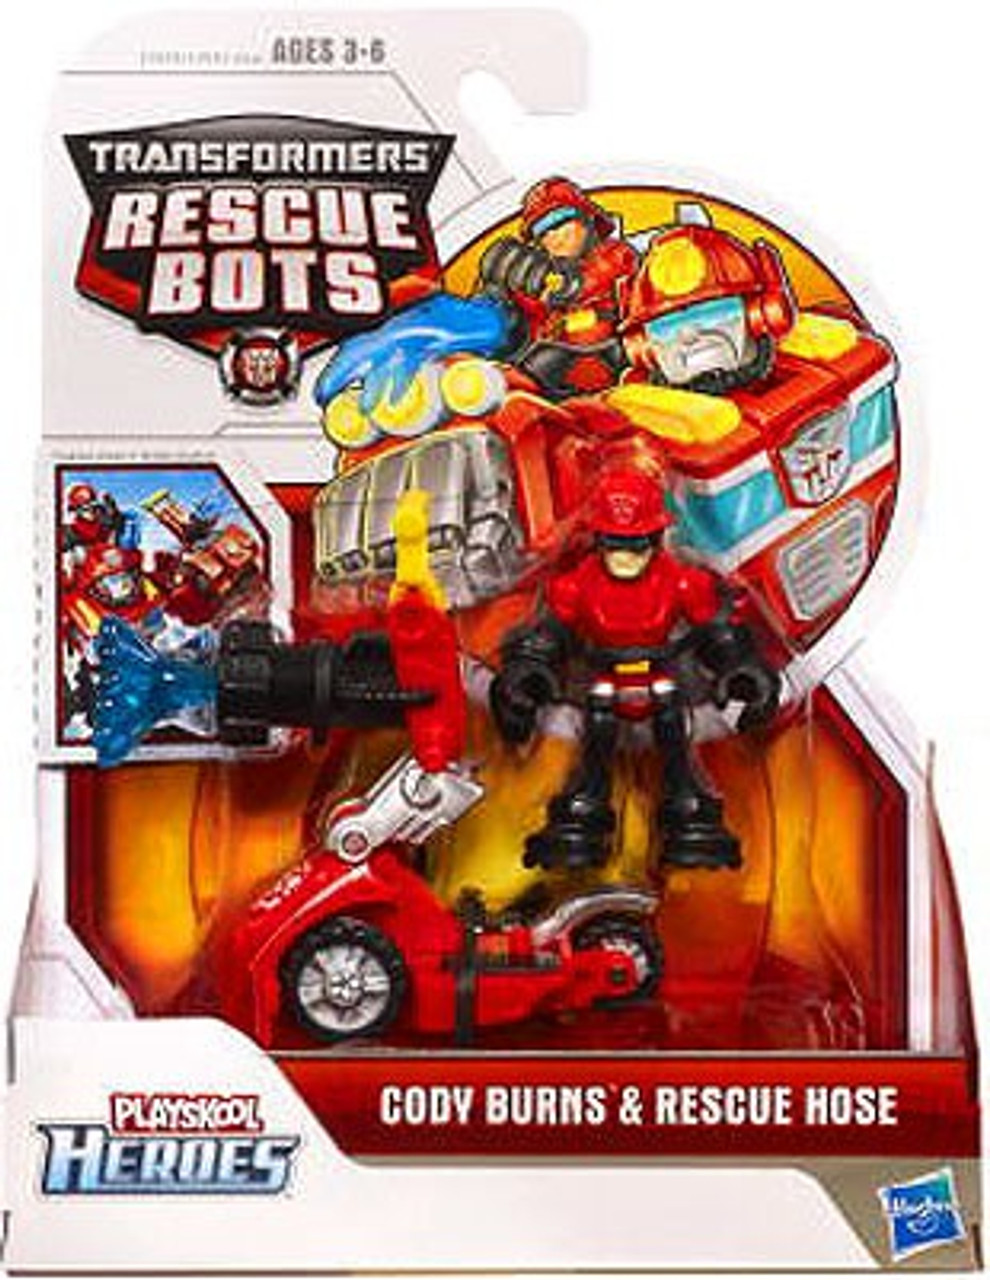 Cody Burns and Rescue Hose Playskool Transformers Rescue Bots 